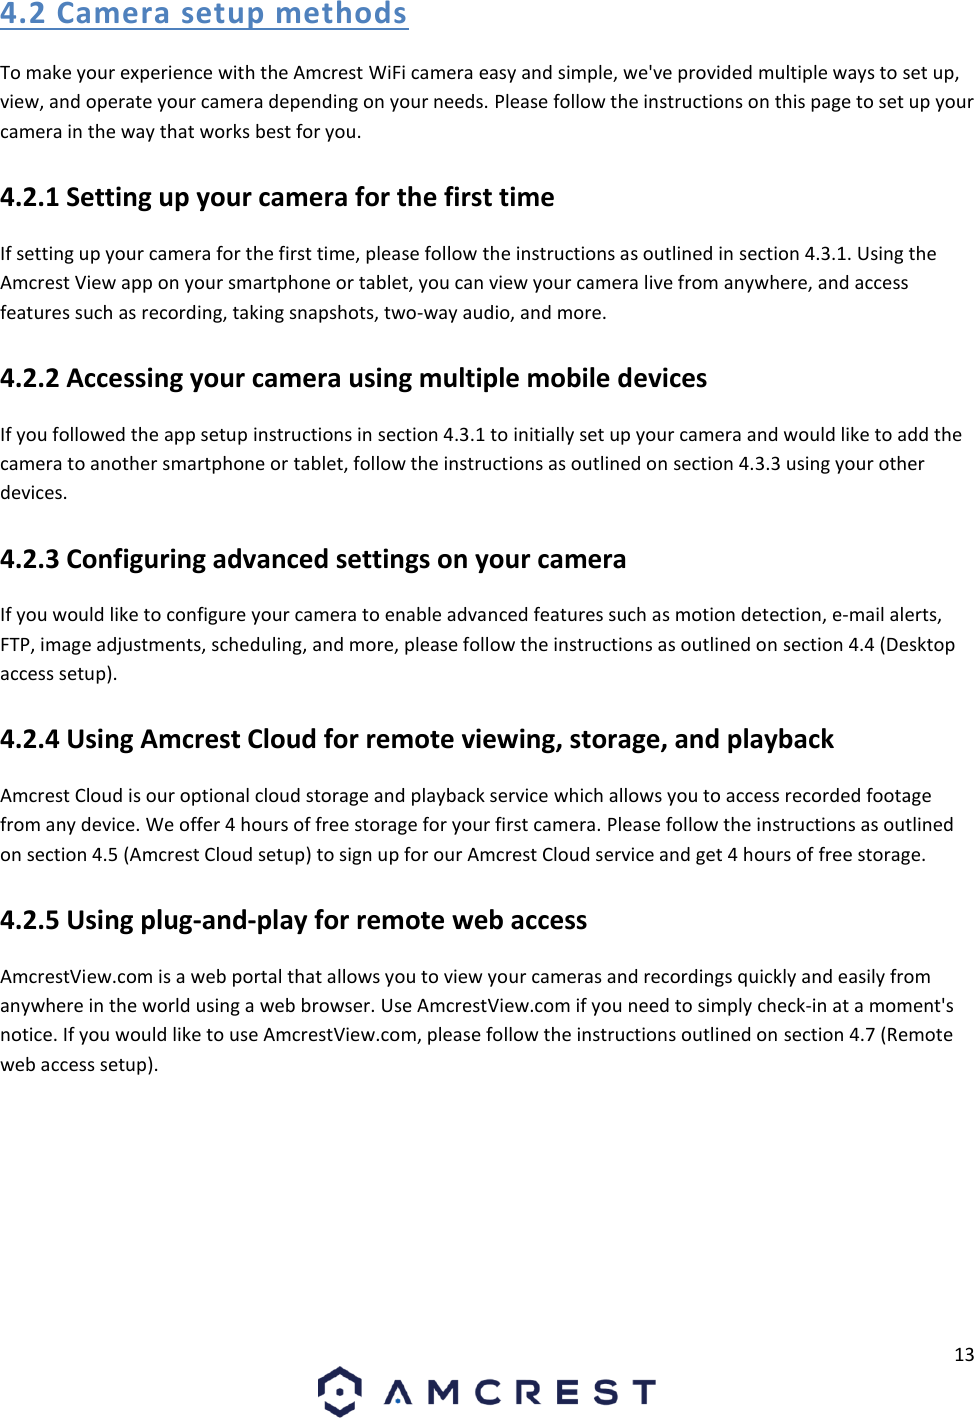 13  4.2 Camera setup methods To make your experience with the Amcrest WiFi camera easy and simple, we&apos;ve provided multiple ways to set up, view, and operate your camera depending on your needs. Please follow the instructions on this page to set up your camera in the way that works best for you. 4.2.1 Setting up your camera for the first time If setting up your camera for the first time, please follow the instructions as outlined in section 4.3.1. Using the Amcrest View app on your smartphone or tablet, you can view your camera live from anywhere, and access features such as recording, taking snapshots, two-way audio, and more. 4.2.2 Accessing your camera using multiple mobile devices If you followed the app setup instructions in section 4.3.1 to initially set up your camera and would like to add the camera to another smartphone or tablet, follow the instructions as outlined on section 4.3.3 using your other devices. 4.2.3 Configuring advanced settings on your camera If you would like to configure your camera to enable advanced features such as motion detection, e-mail alerts, FTP, image adjustments, scheduling, and more, please follow the instructions as outlined on section 4.4 (Desktop access setup). 4.2.4 Using Amcrest Cloud for remote viewing, storage, and playback Amcrest Cloud is our optional cloud storage and playback service which allows you to access recorded footage from any device. We offer 4 hours of free storage for your first camera. Please follow the instructions as outlined on section 4.5 (Amcrest Cloud setup) to sign up for our Amcrest Cloud service and get 4 hours of free storage. 4.2.5 Using plug-and-play for remote web access AmcrestView.com is a web portal that allows you to view your cameras and recordings quickly and easily from anywhere in the world using a web browser. Use AmcrestView.com if you need to simply check-in at a moment&apos;s notice. If you would like to use AmcrestView.com, please follow the instructions outlined on section 4.7 (Remote web access setup).    